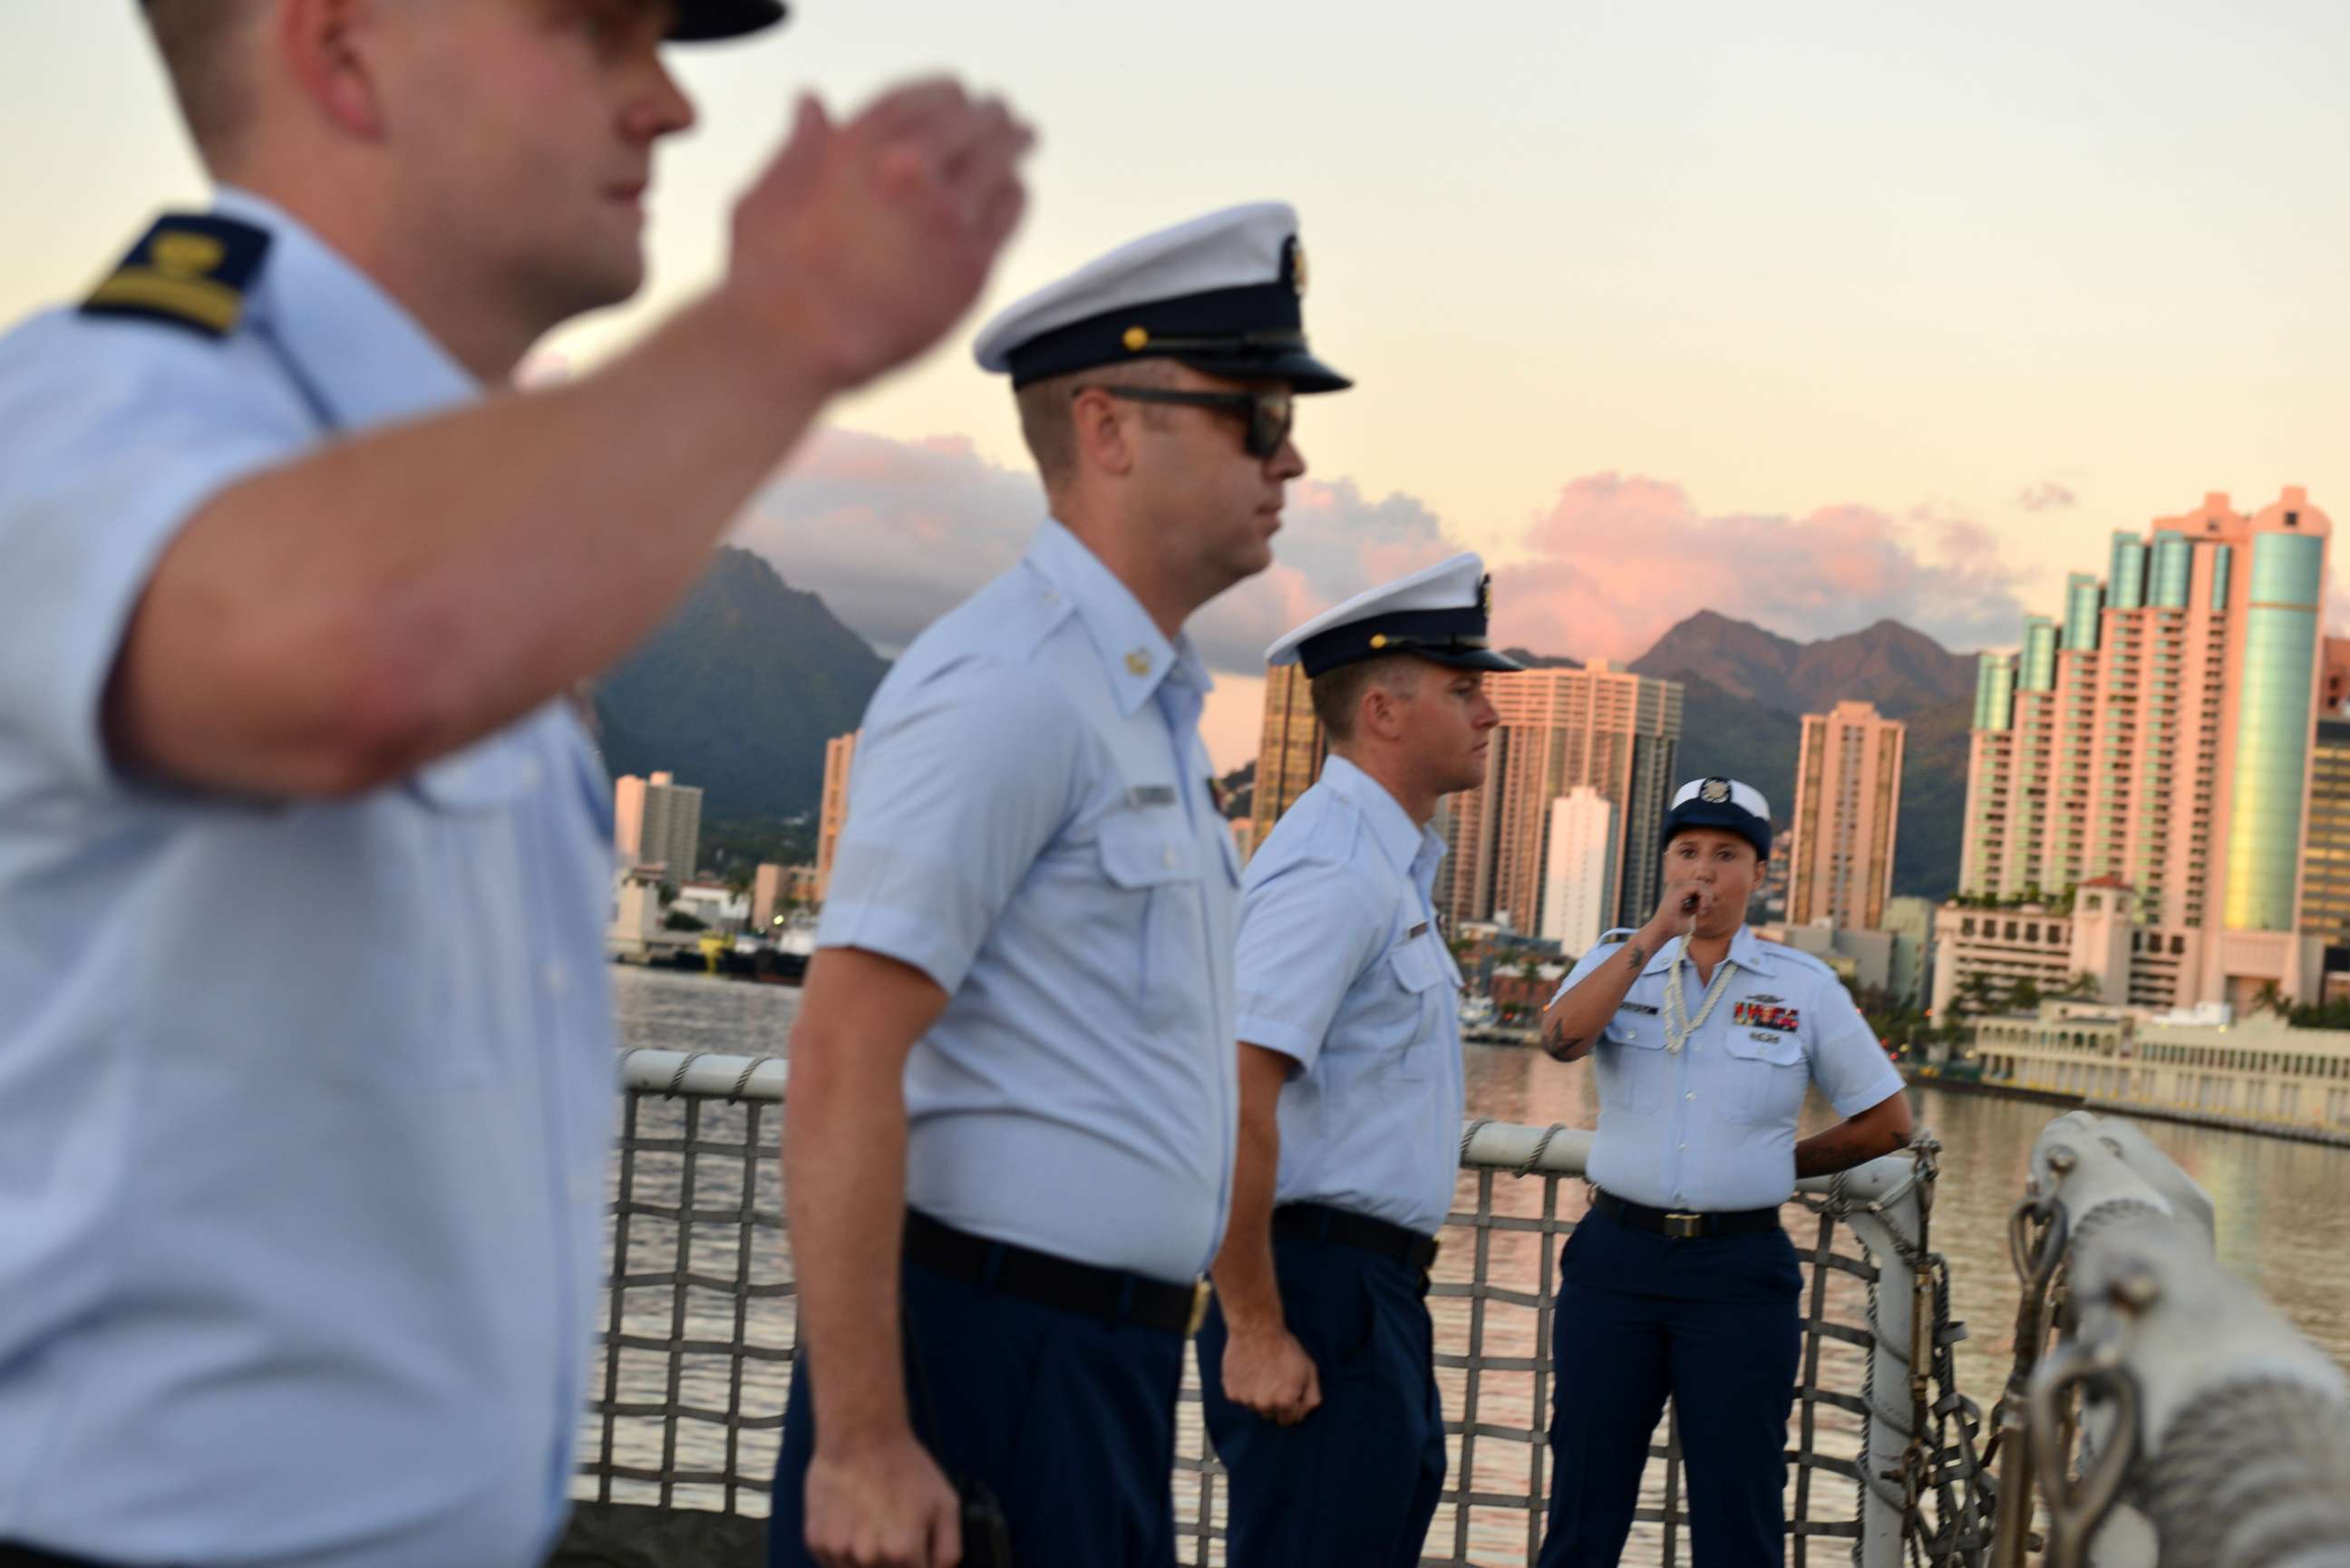 PHOTO: Petty Officer 3rd Class Bianca Valenzuela pipes colors using a boatswains pipe during a ceremony aboard the Coast Guard Cutter Sherman the evening before the cutter is scheduled to be decommissioned in Honolulu, Mar. 28, 2018.